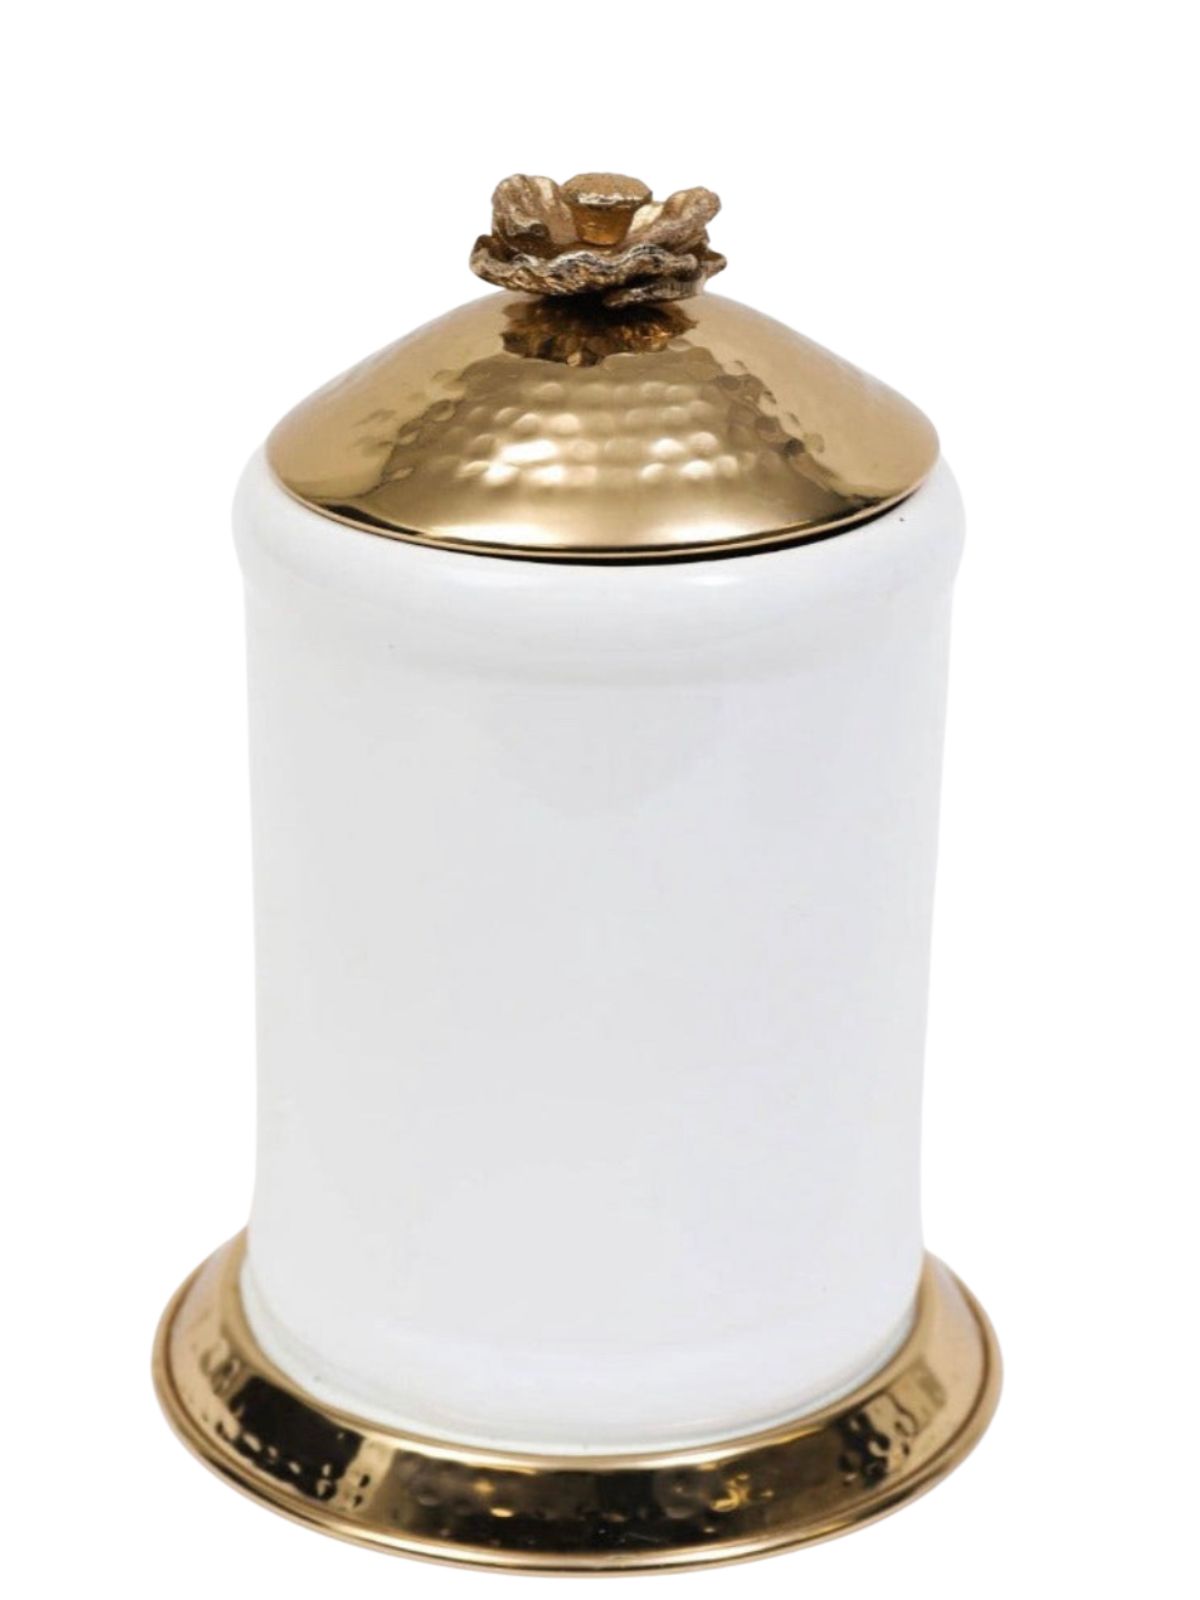 10H Luxury white ceramic canisters with gold base and gold hammered lid with floral details - KYA Home Decor.